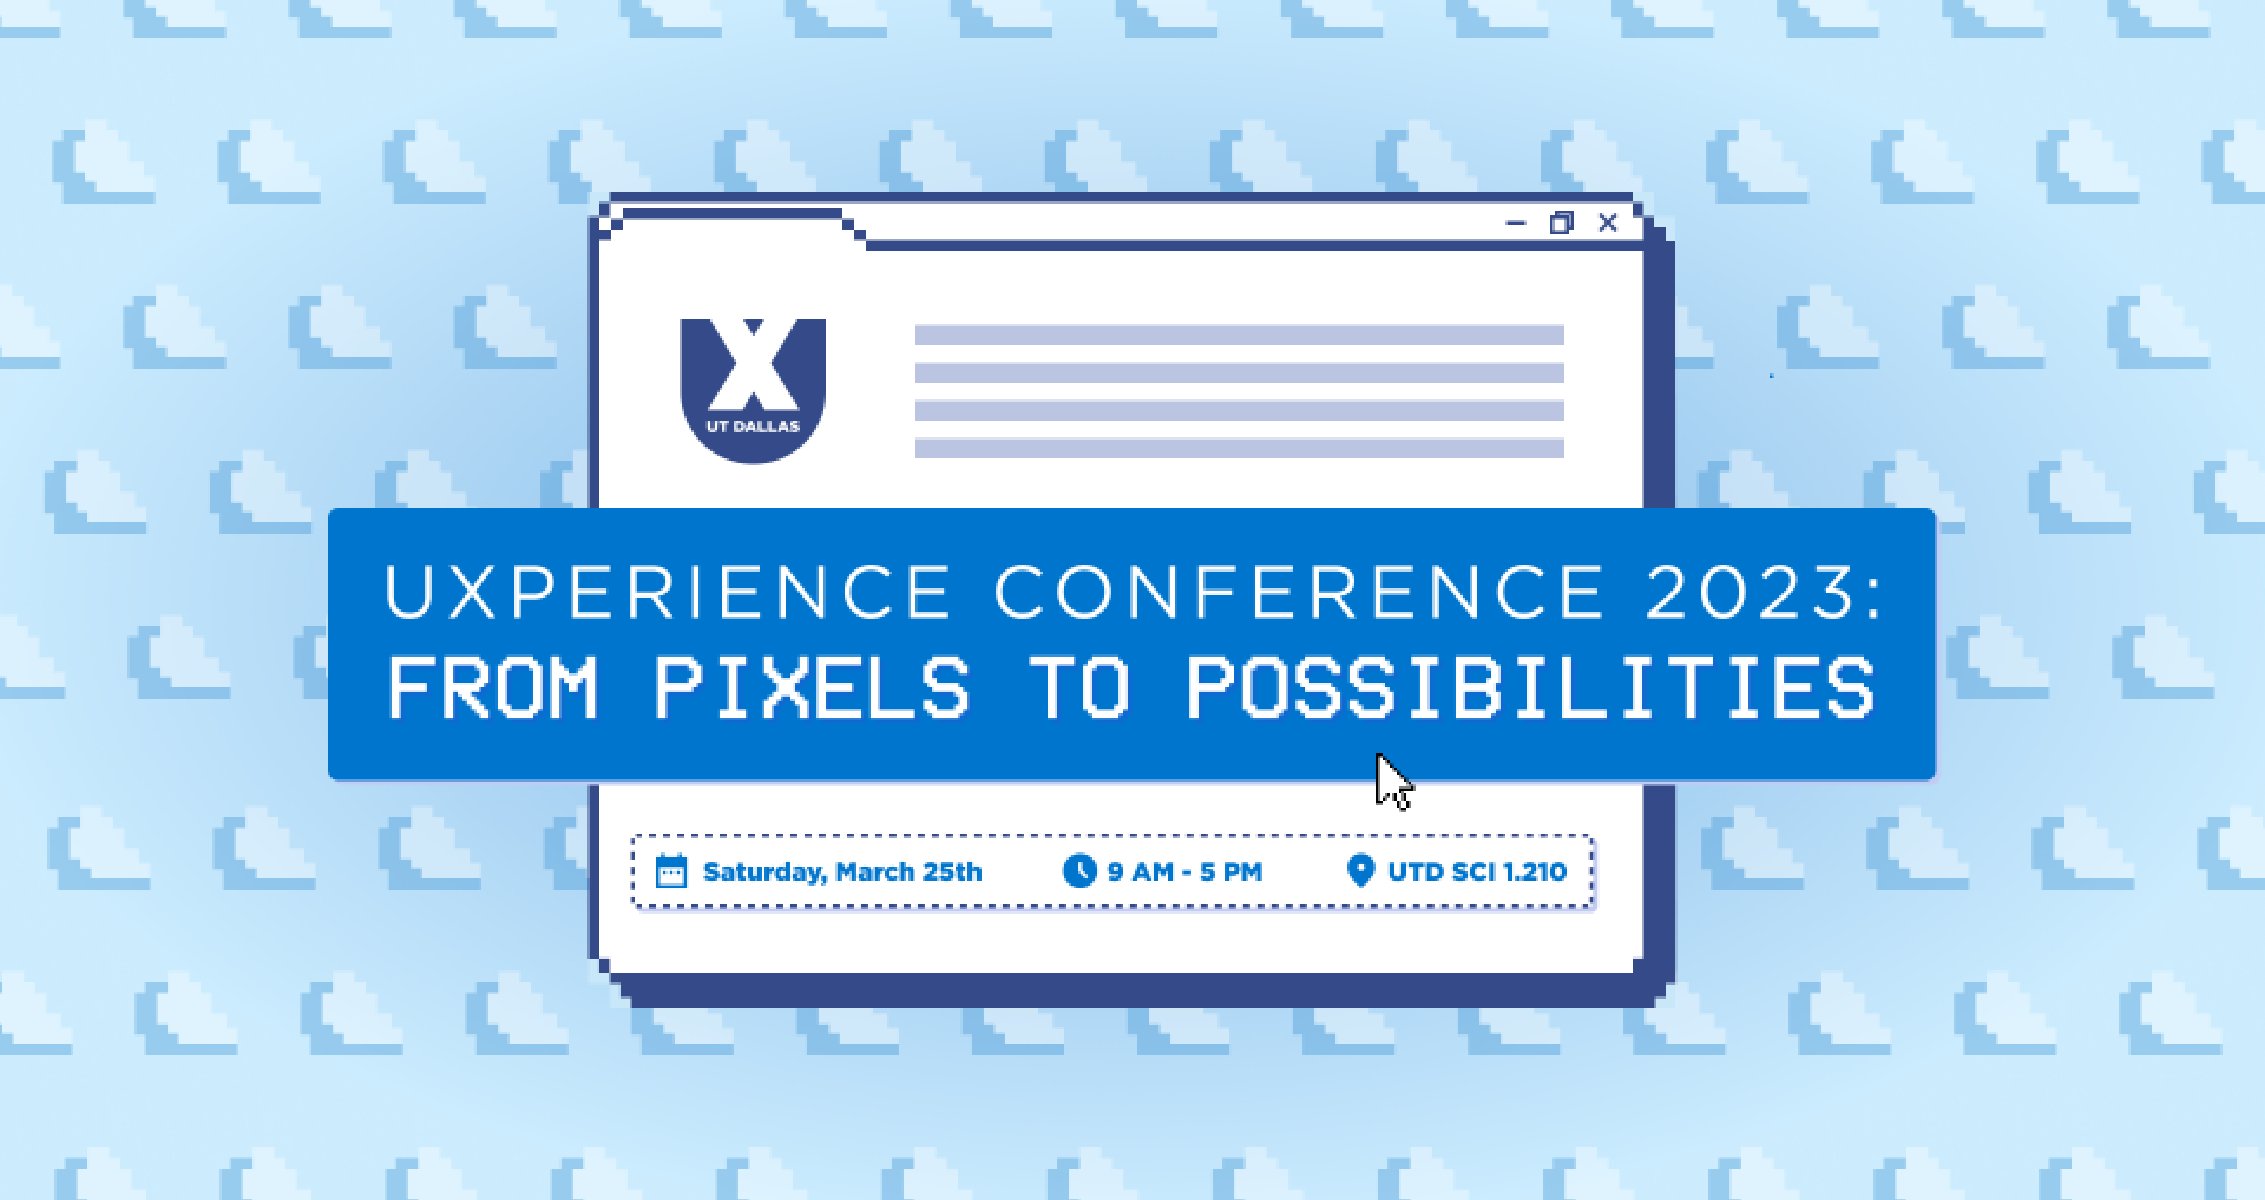 Uxperience 2023: Pixels-to-Possibilities